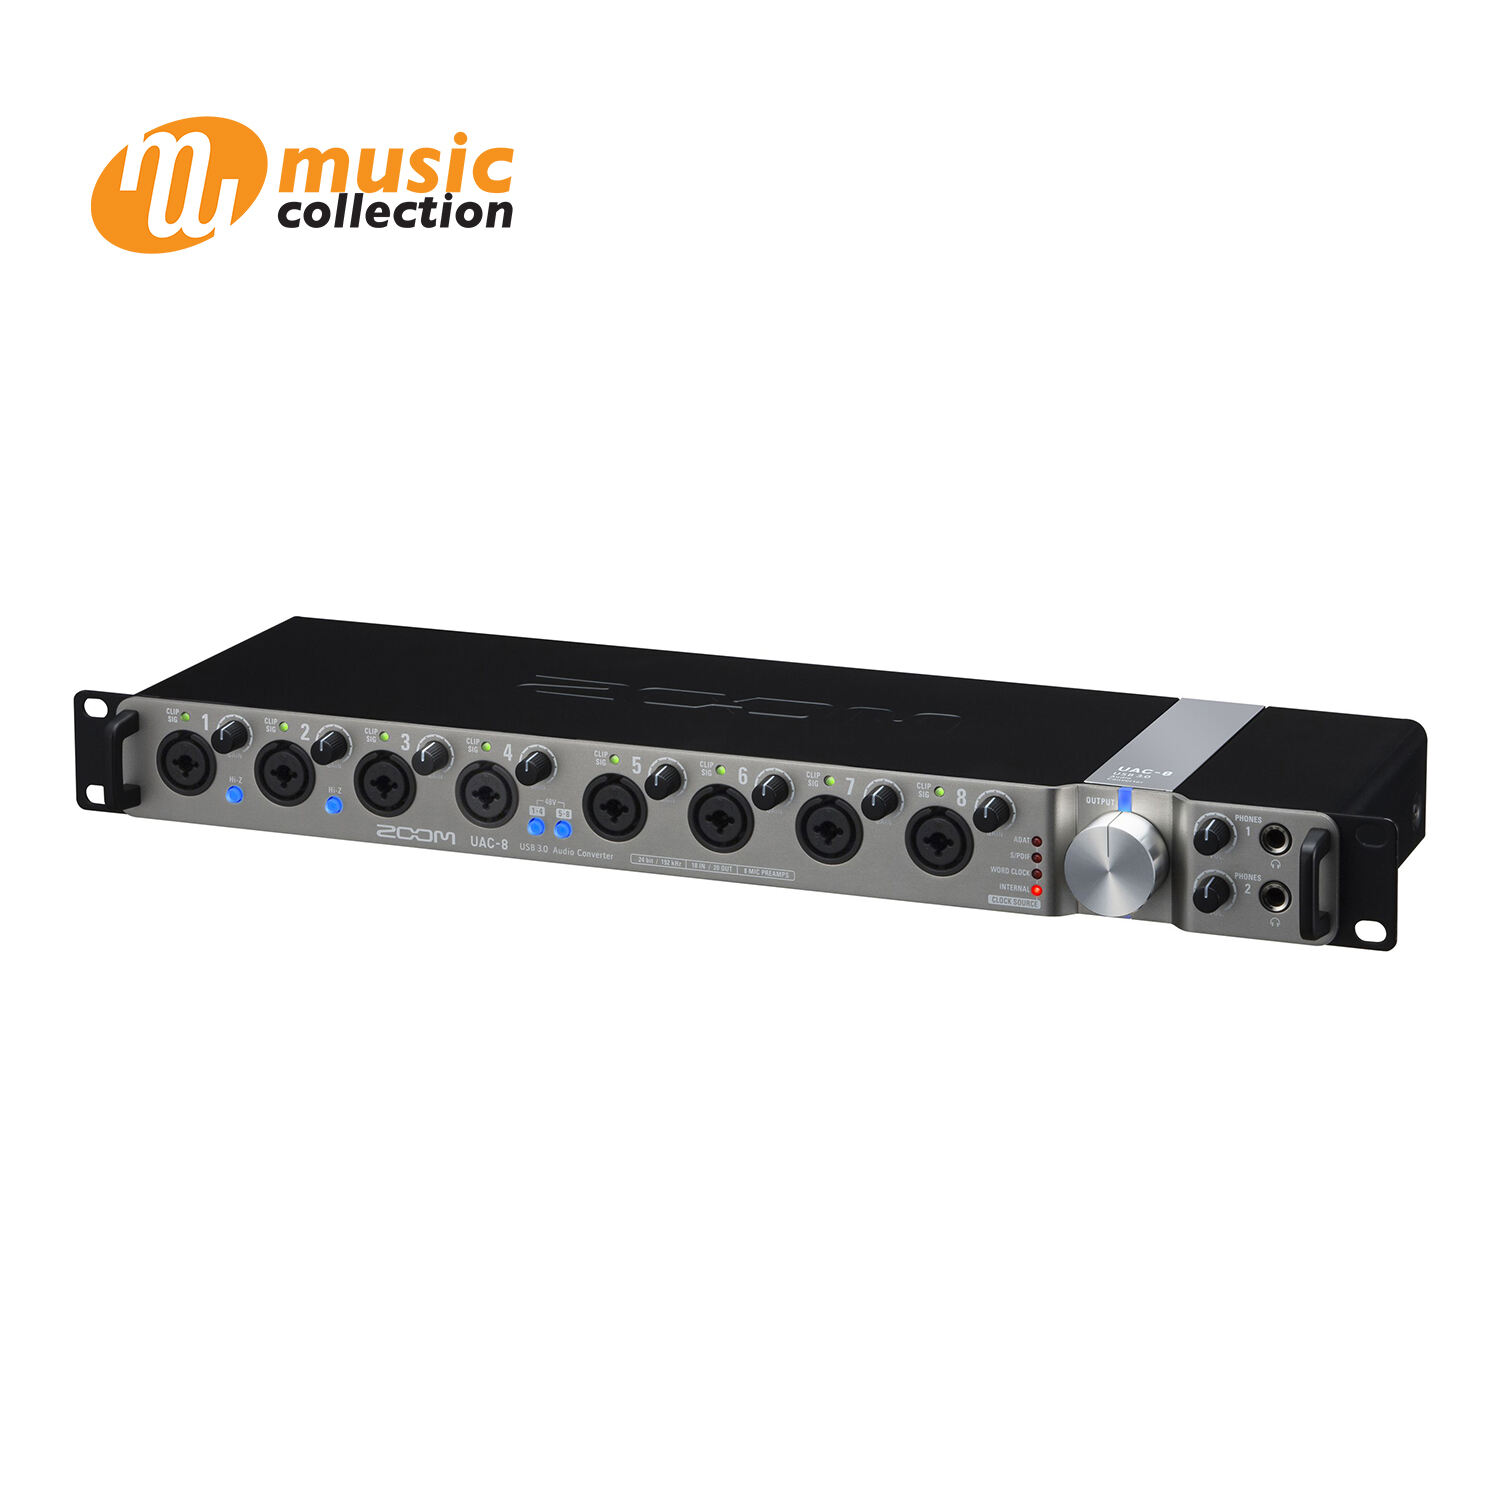 ZOOM UAC-8 AUDIO INTERFACE - Music Collection